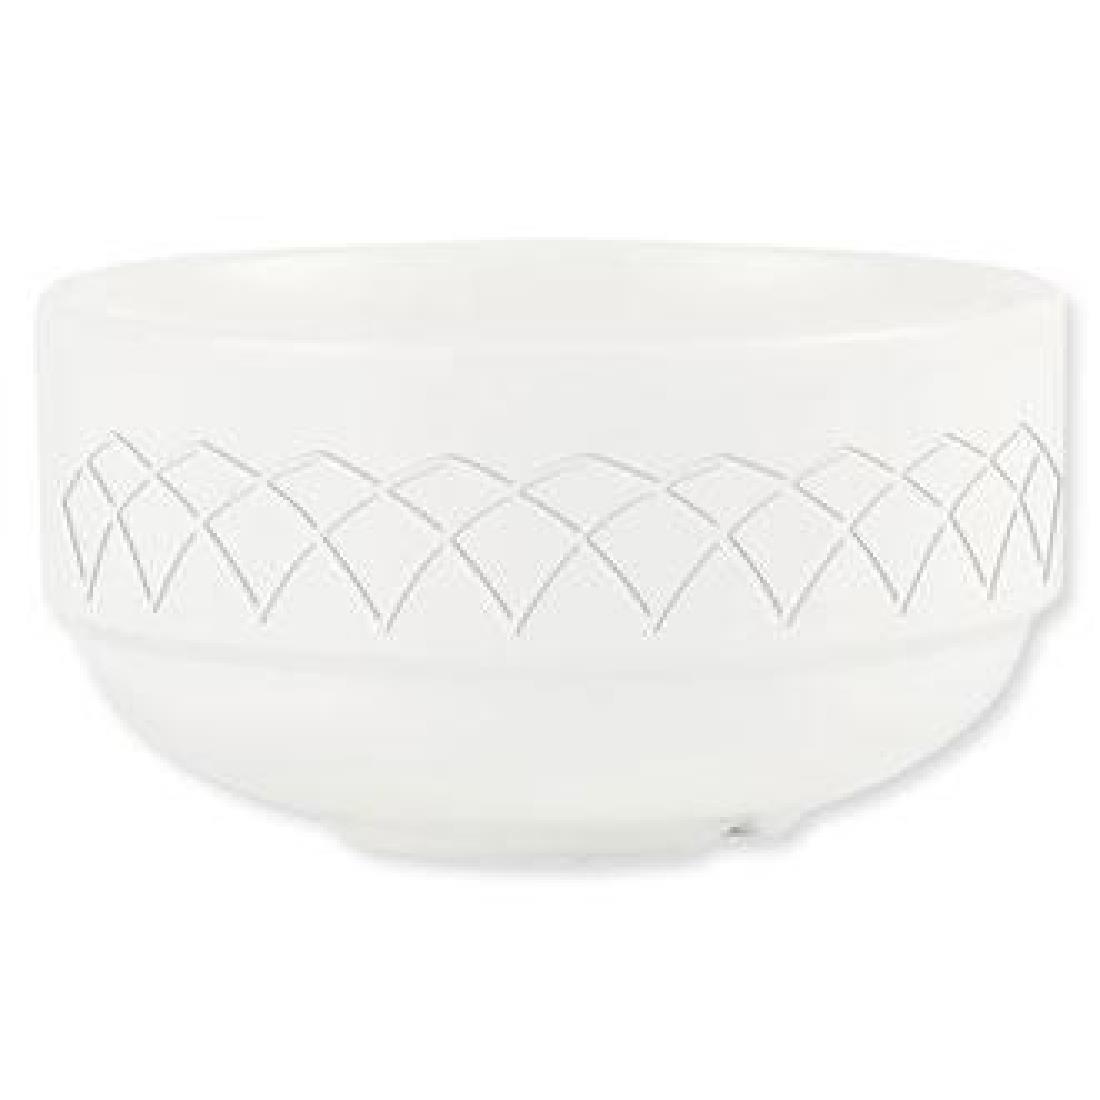 Y645 - Alchemy Jardin Consomme Bowl Unhandled